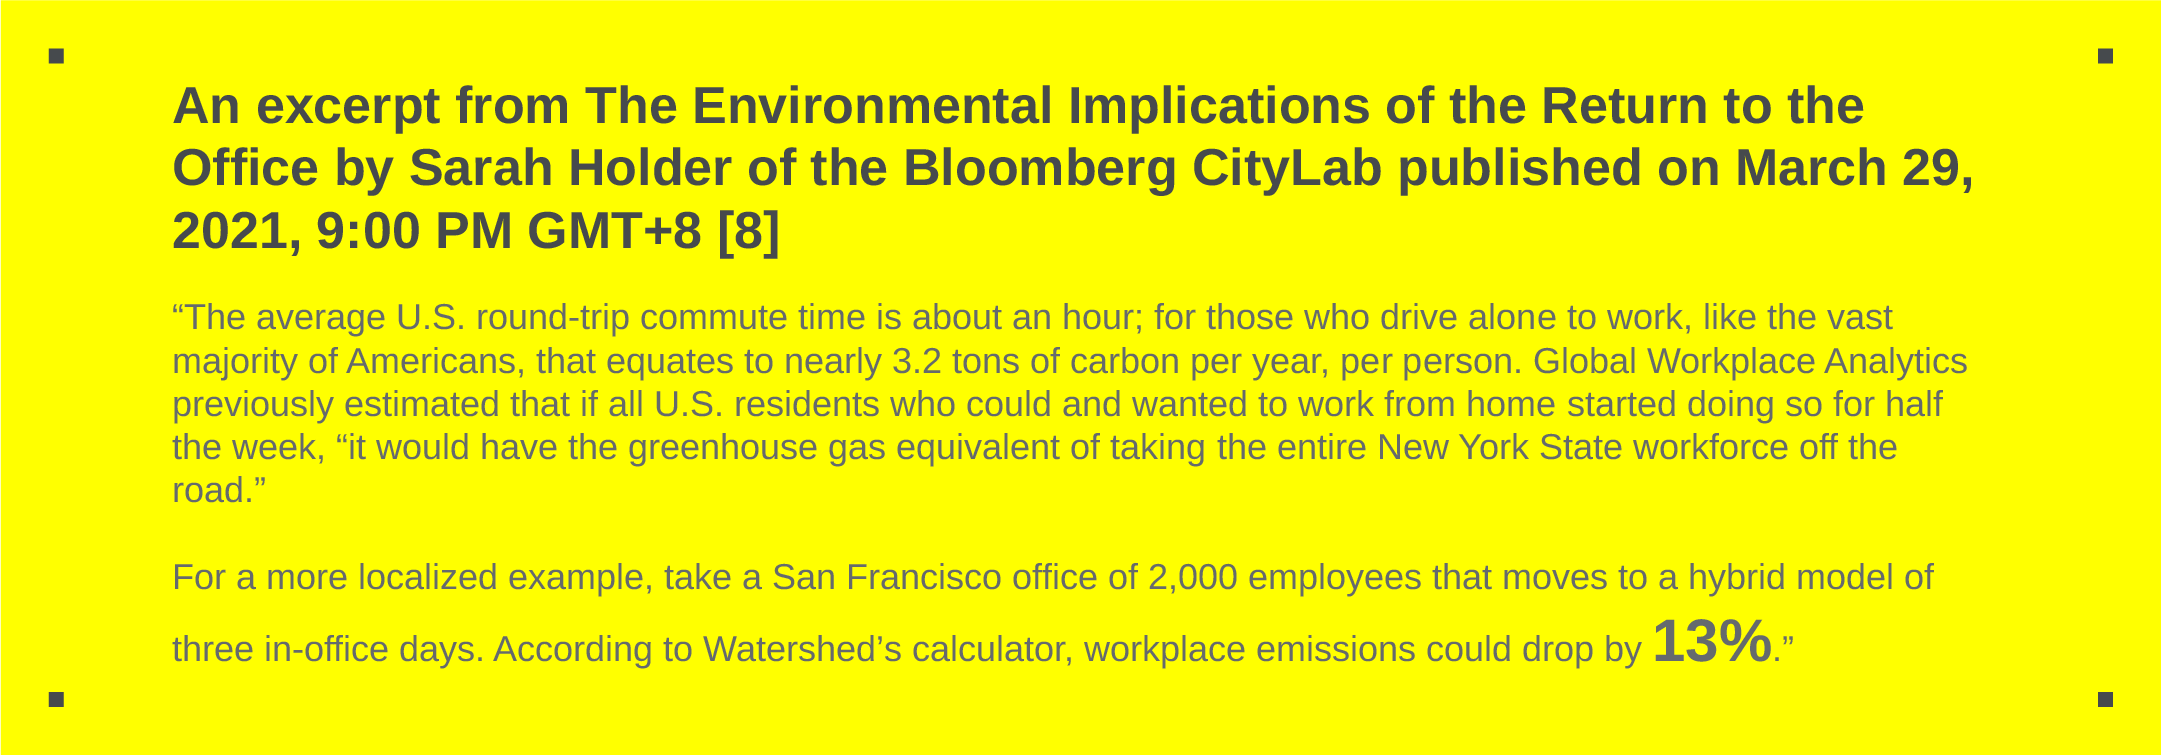 An excerpt from The Environmental Implications of the Return to the Office by Sarah Holder of the Bloomberg CityLab published on March 29, 2021, 9:00 PM GMT+8 [8] “The average U.S. round-trip commute time is about an hour; for those who drive alone to work, like the vast majority of Americans, that equates to nearly 3.2 tons of carbon per year, per person. Global Workplace Analytics previously estimated that if all U.S. residents who could and wanted to work from home started doing so for half the week, “it would have the greenhouse gas equivalent of taking the entire New York State workforce off the road.” For a more localized example, take a San Francisco office of 2,000 employees that moves to a hybrid model of three in-office days. According to Watershed’s calculator, workplace emissions could drop by 13%.”